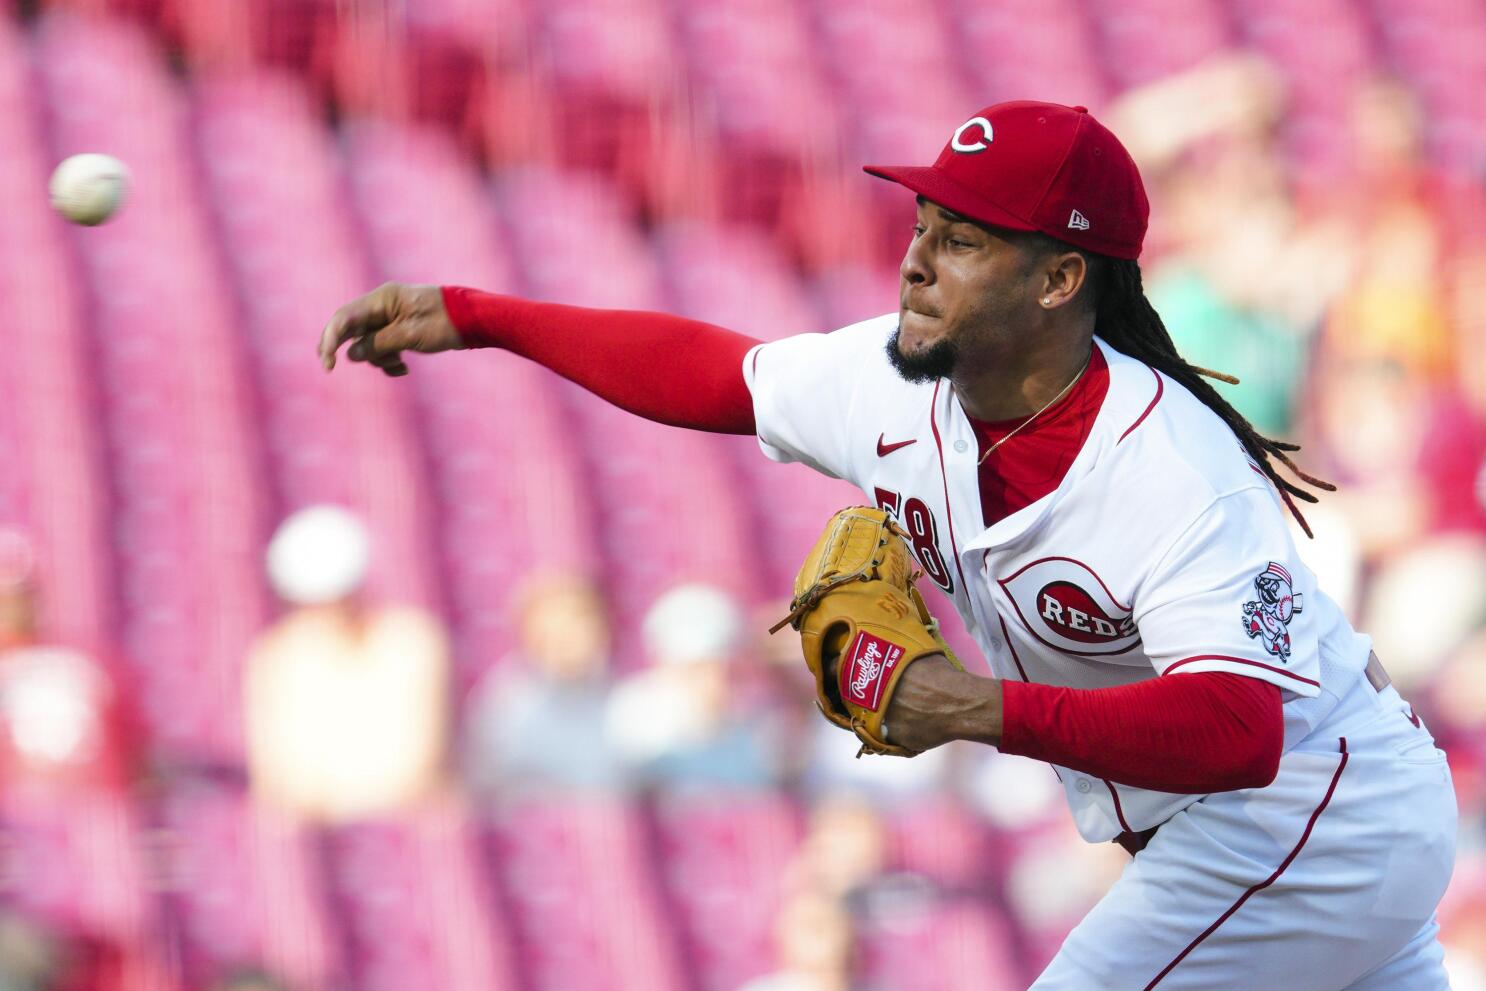 Luis Castillo on Reds' pitching staff: 'We're a family